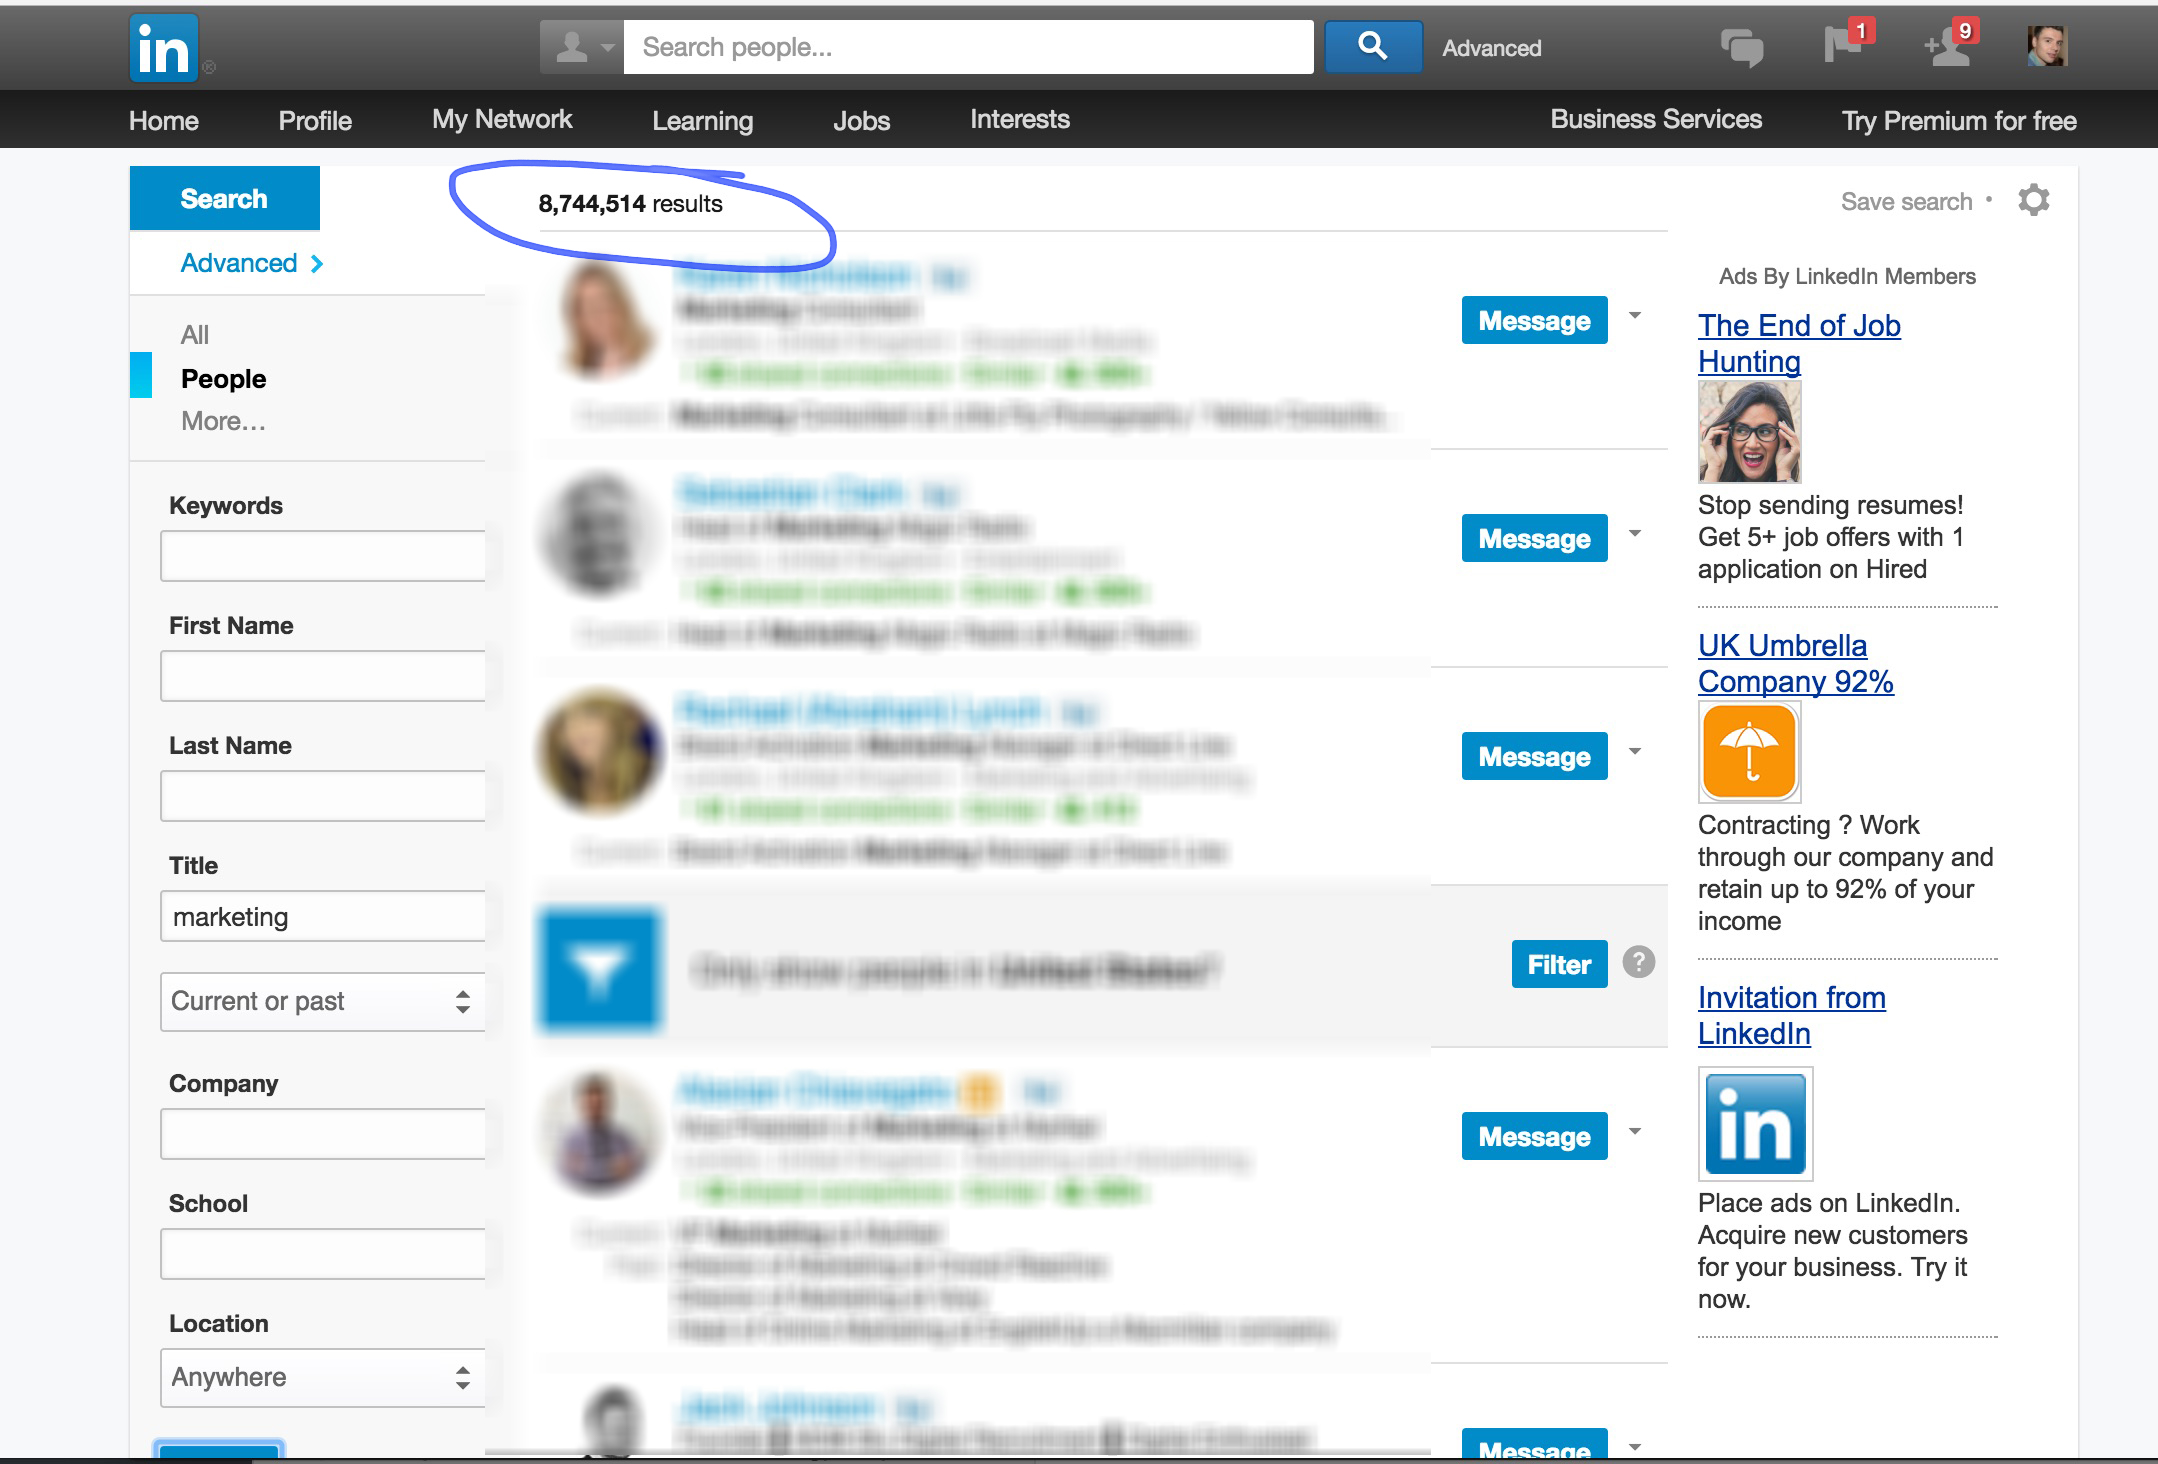 Using LinkedIn to estimate market sizes as a business skills for product managers